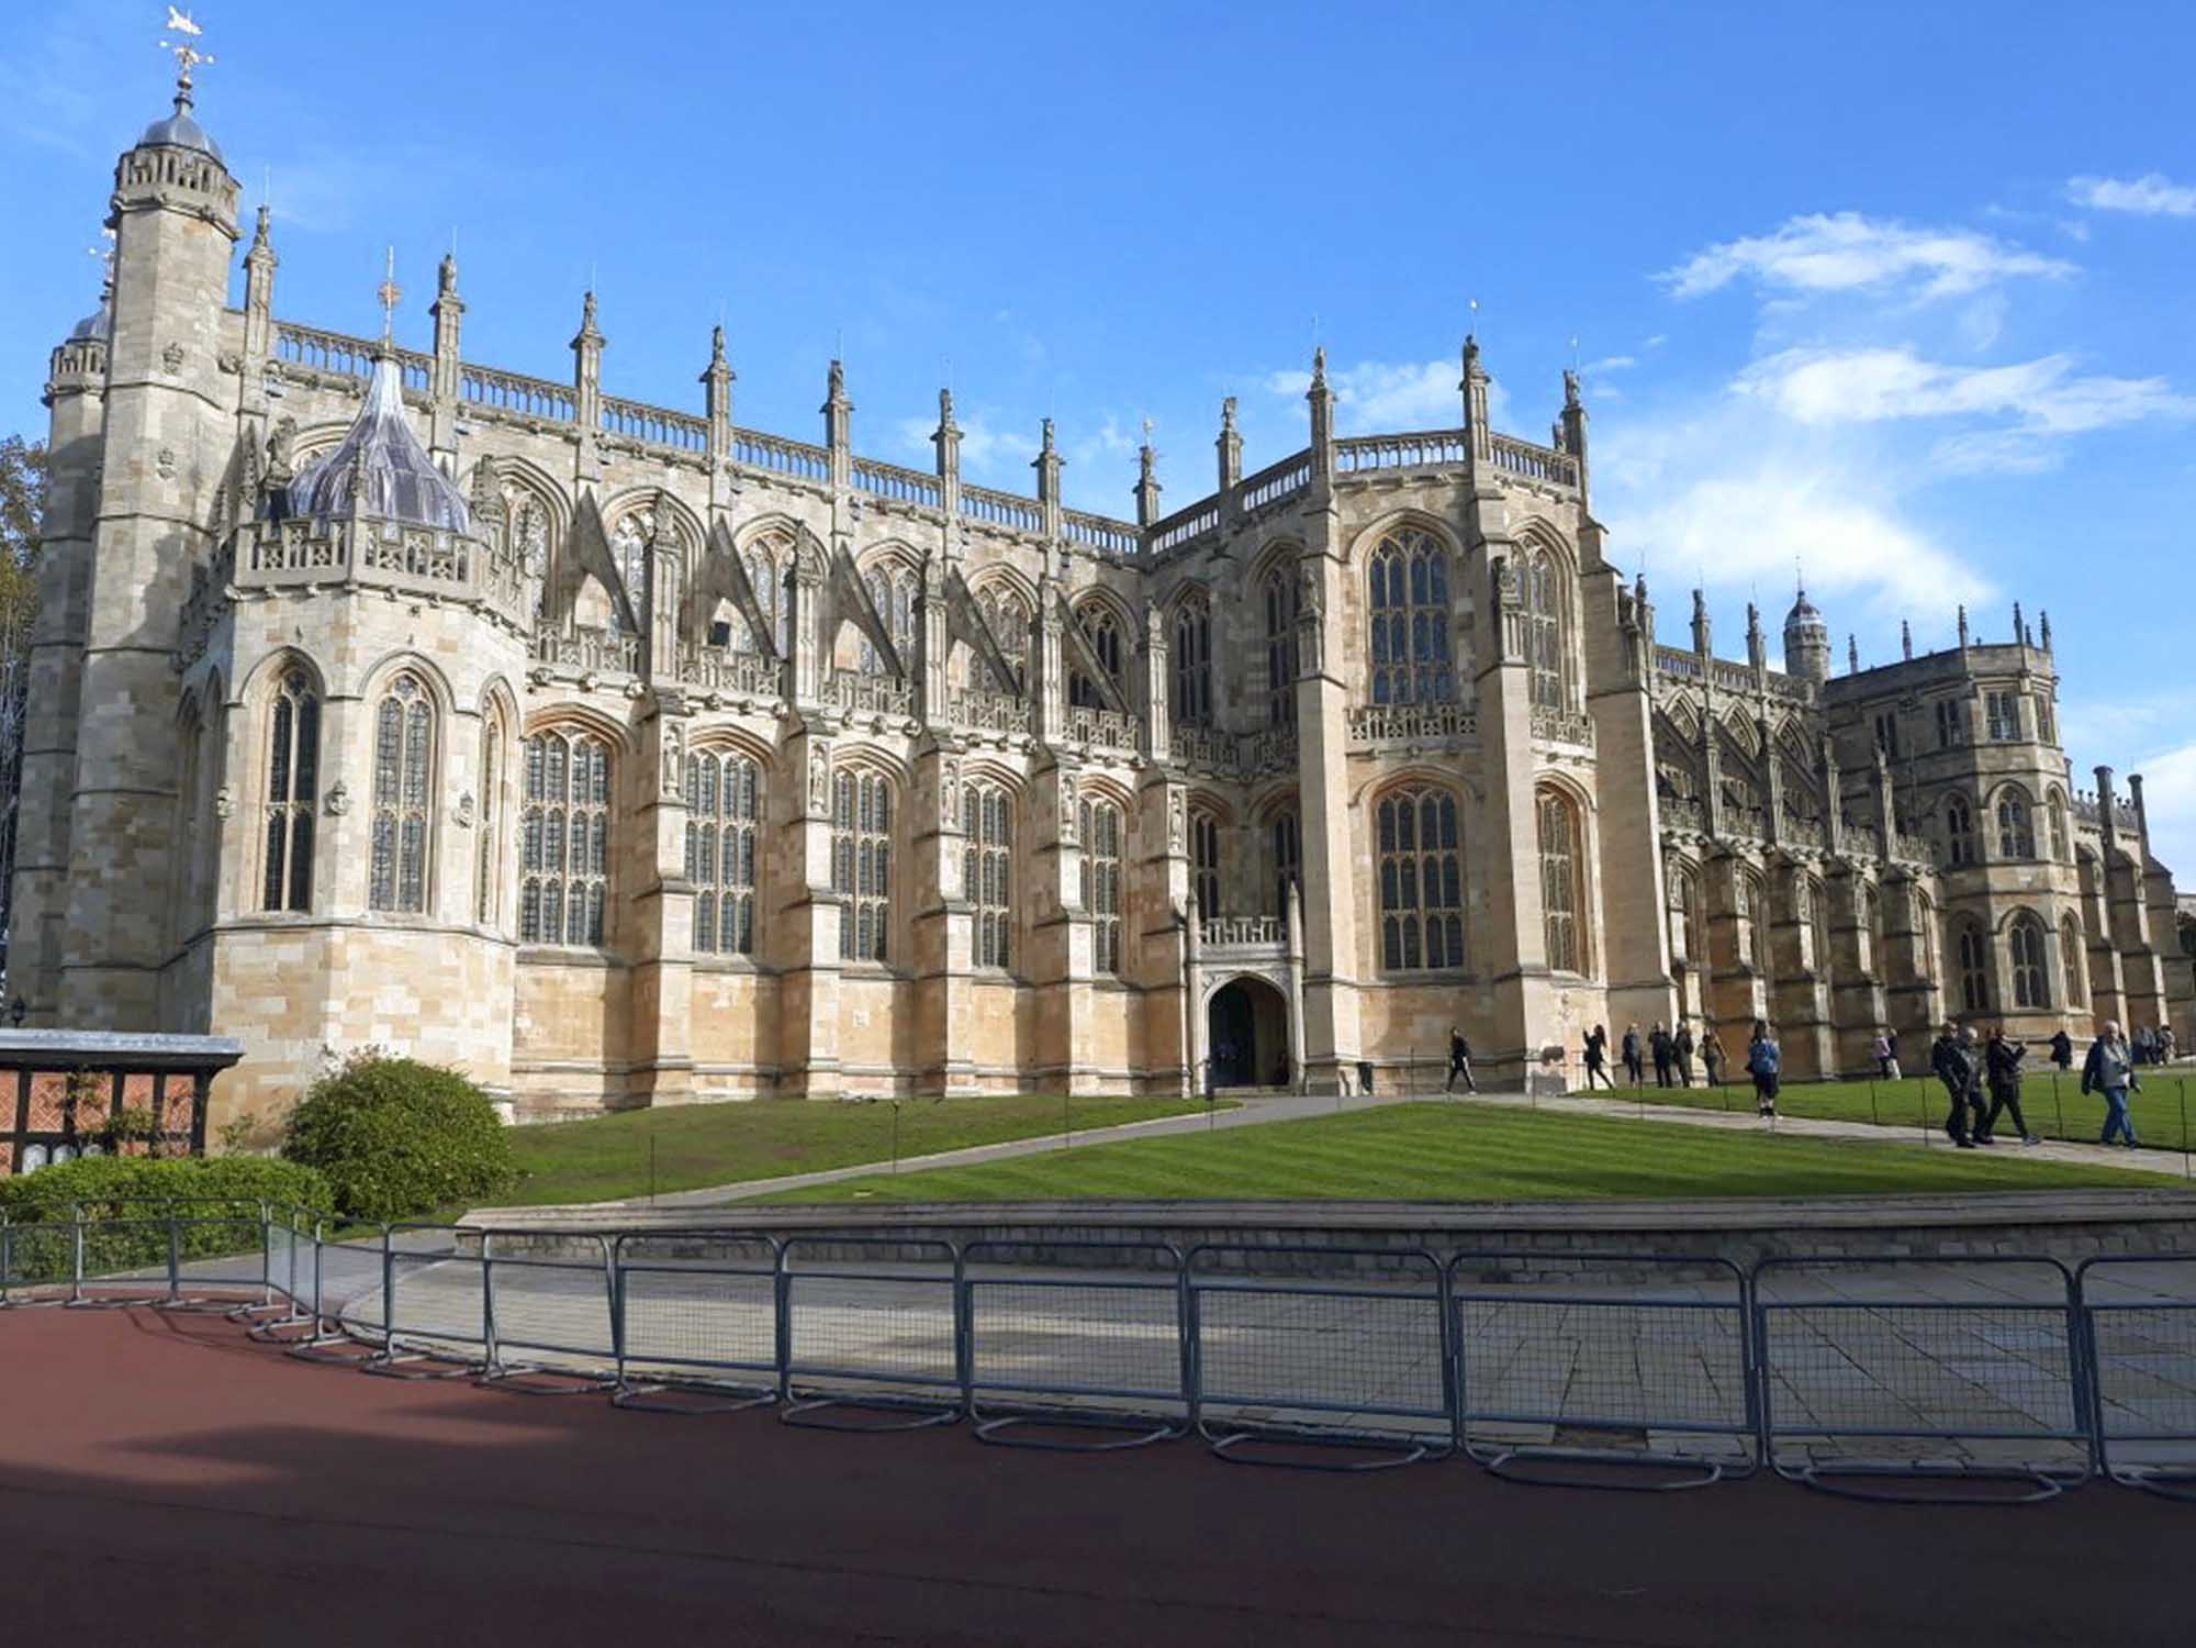 Things to do in Windsor - St. George's Chapel